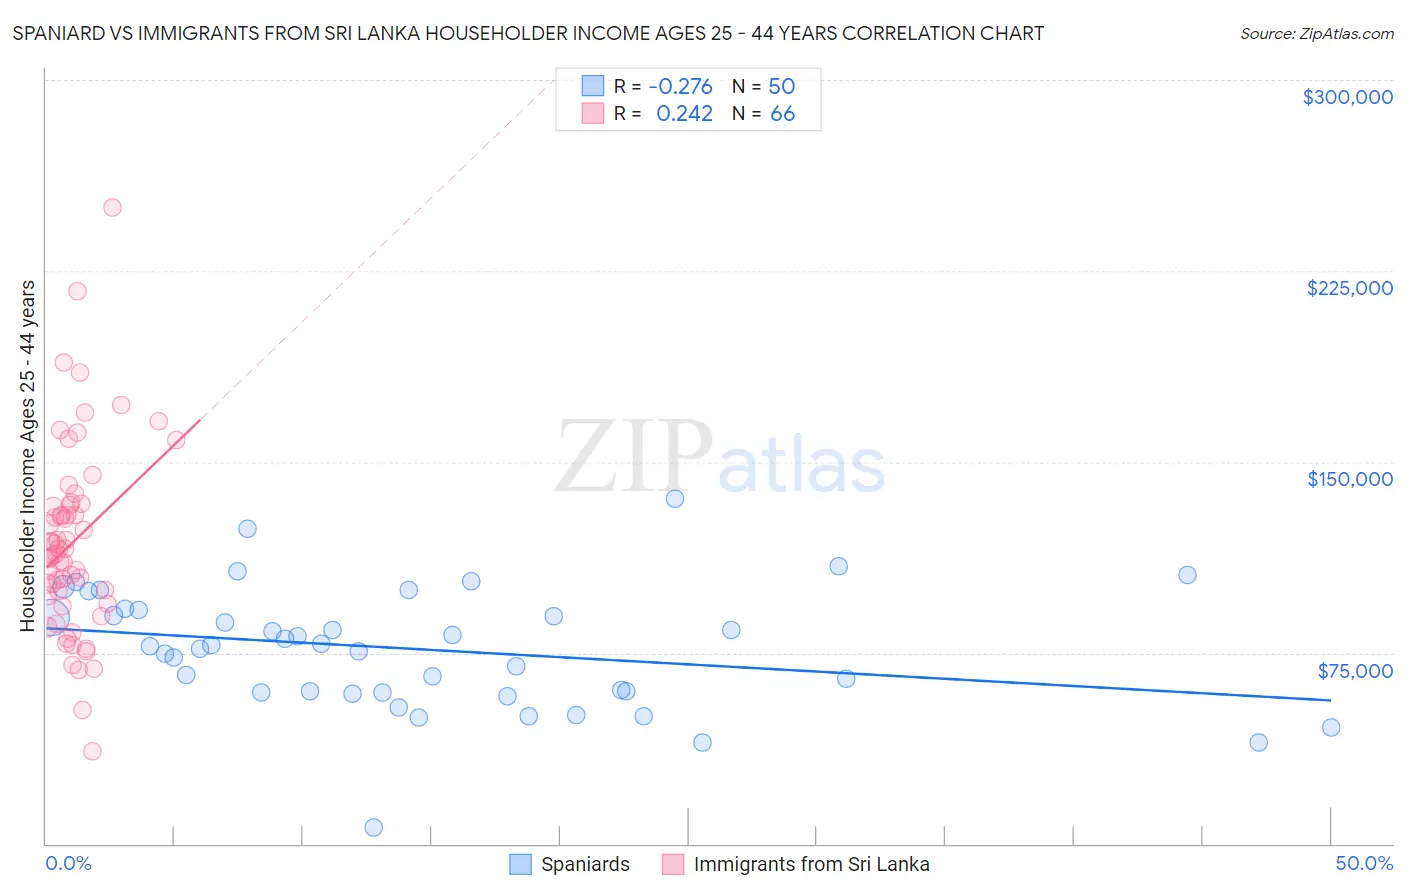 Spaniard vs Immigrants from Sri Lanka Householder Income Ages 25 - 44 years